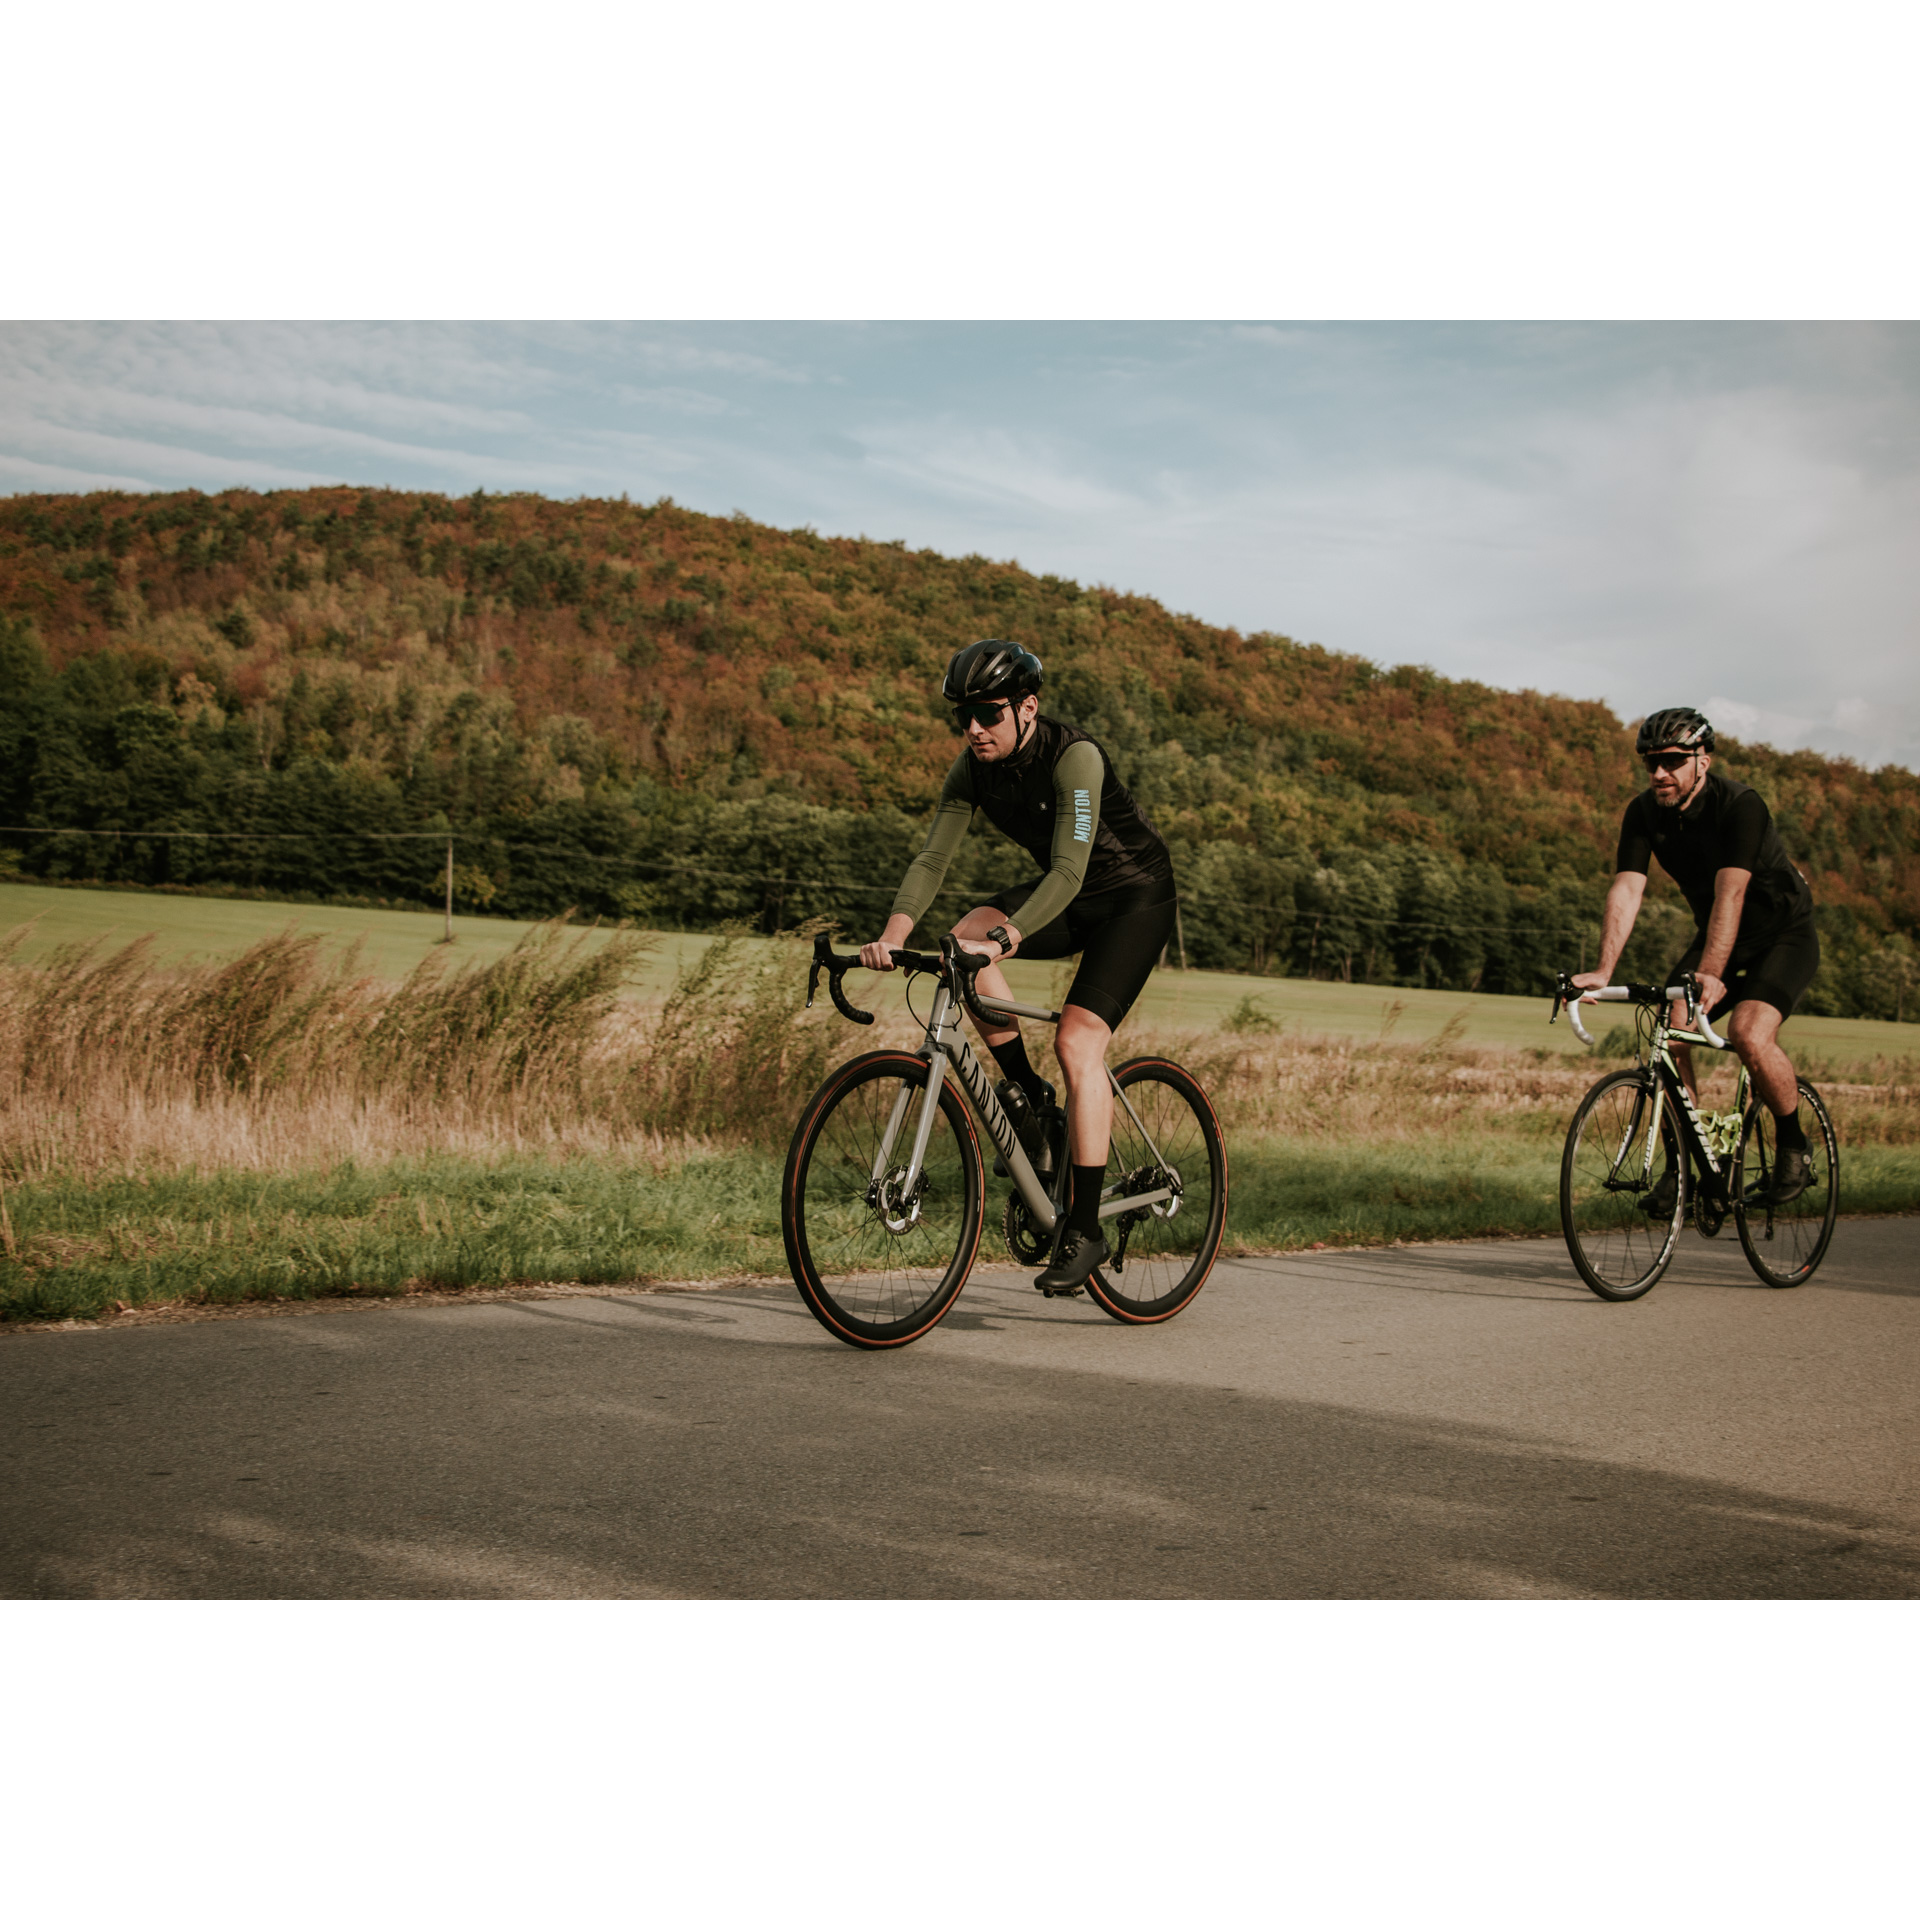 Two cyclists in black cycling clothes and helmets riding on an asphalt road running along meadows, in the background a hill covered with brown and green trees